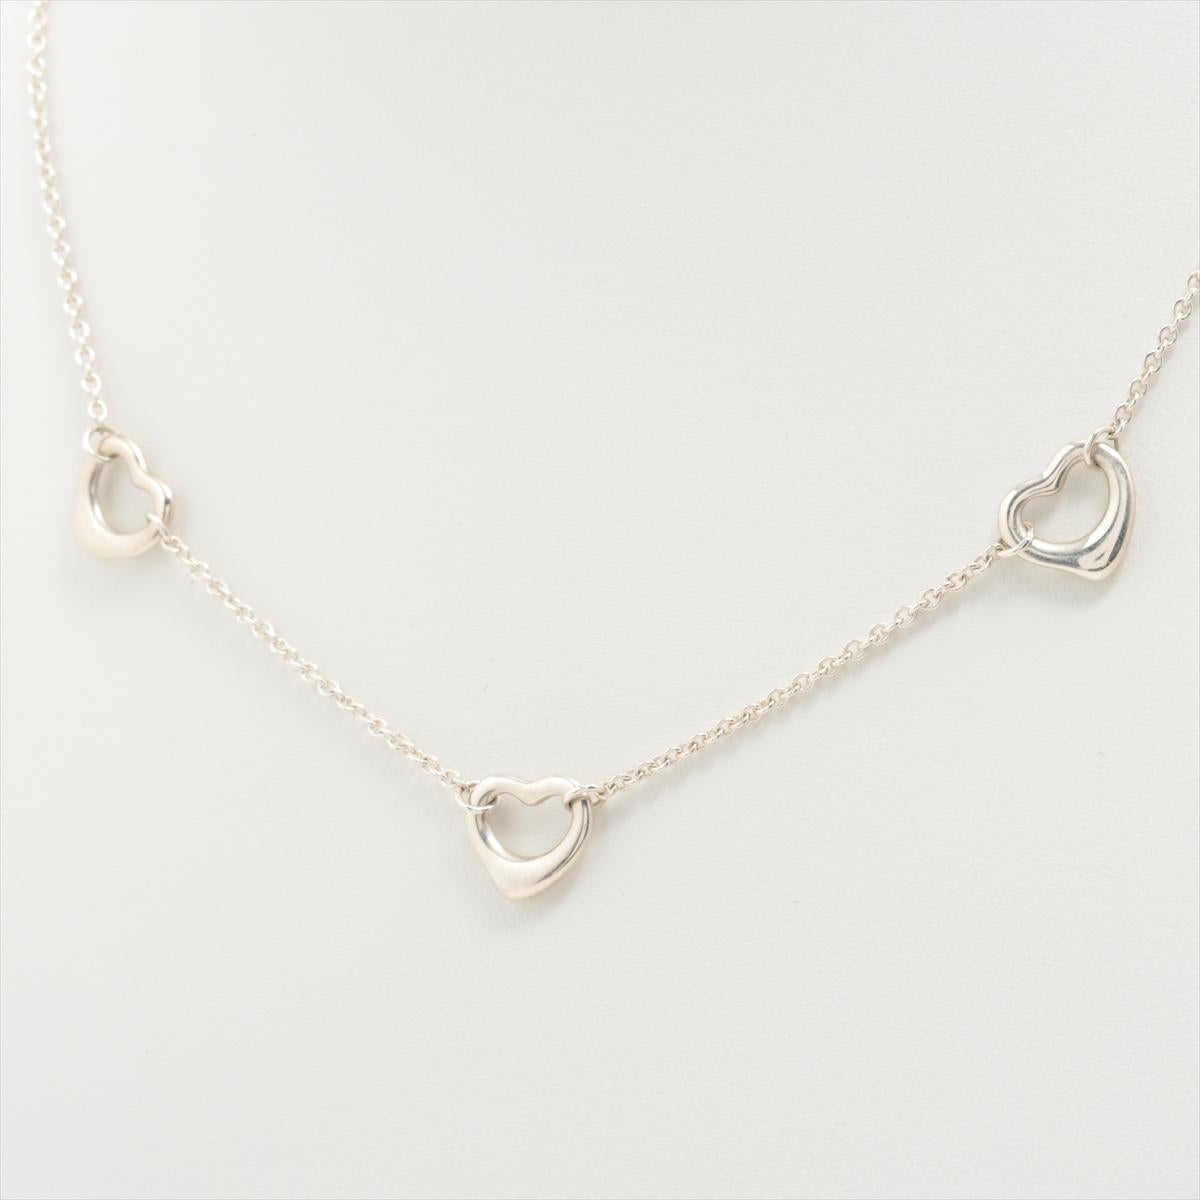 The Tiffany & Co. Return To Tiffany Oval Tag Necklace in Silver is an iconic and timeless piece of jewelry that epitomizes elegance and sophistication. Crafted from high-quality sterling silver, the necklace features a classic oval-shaped pendant